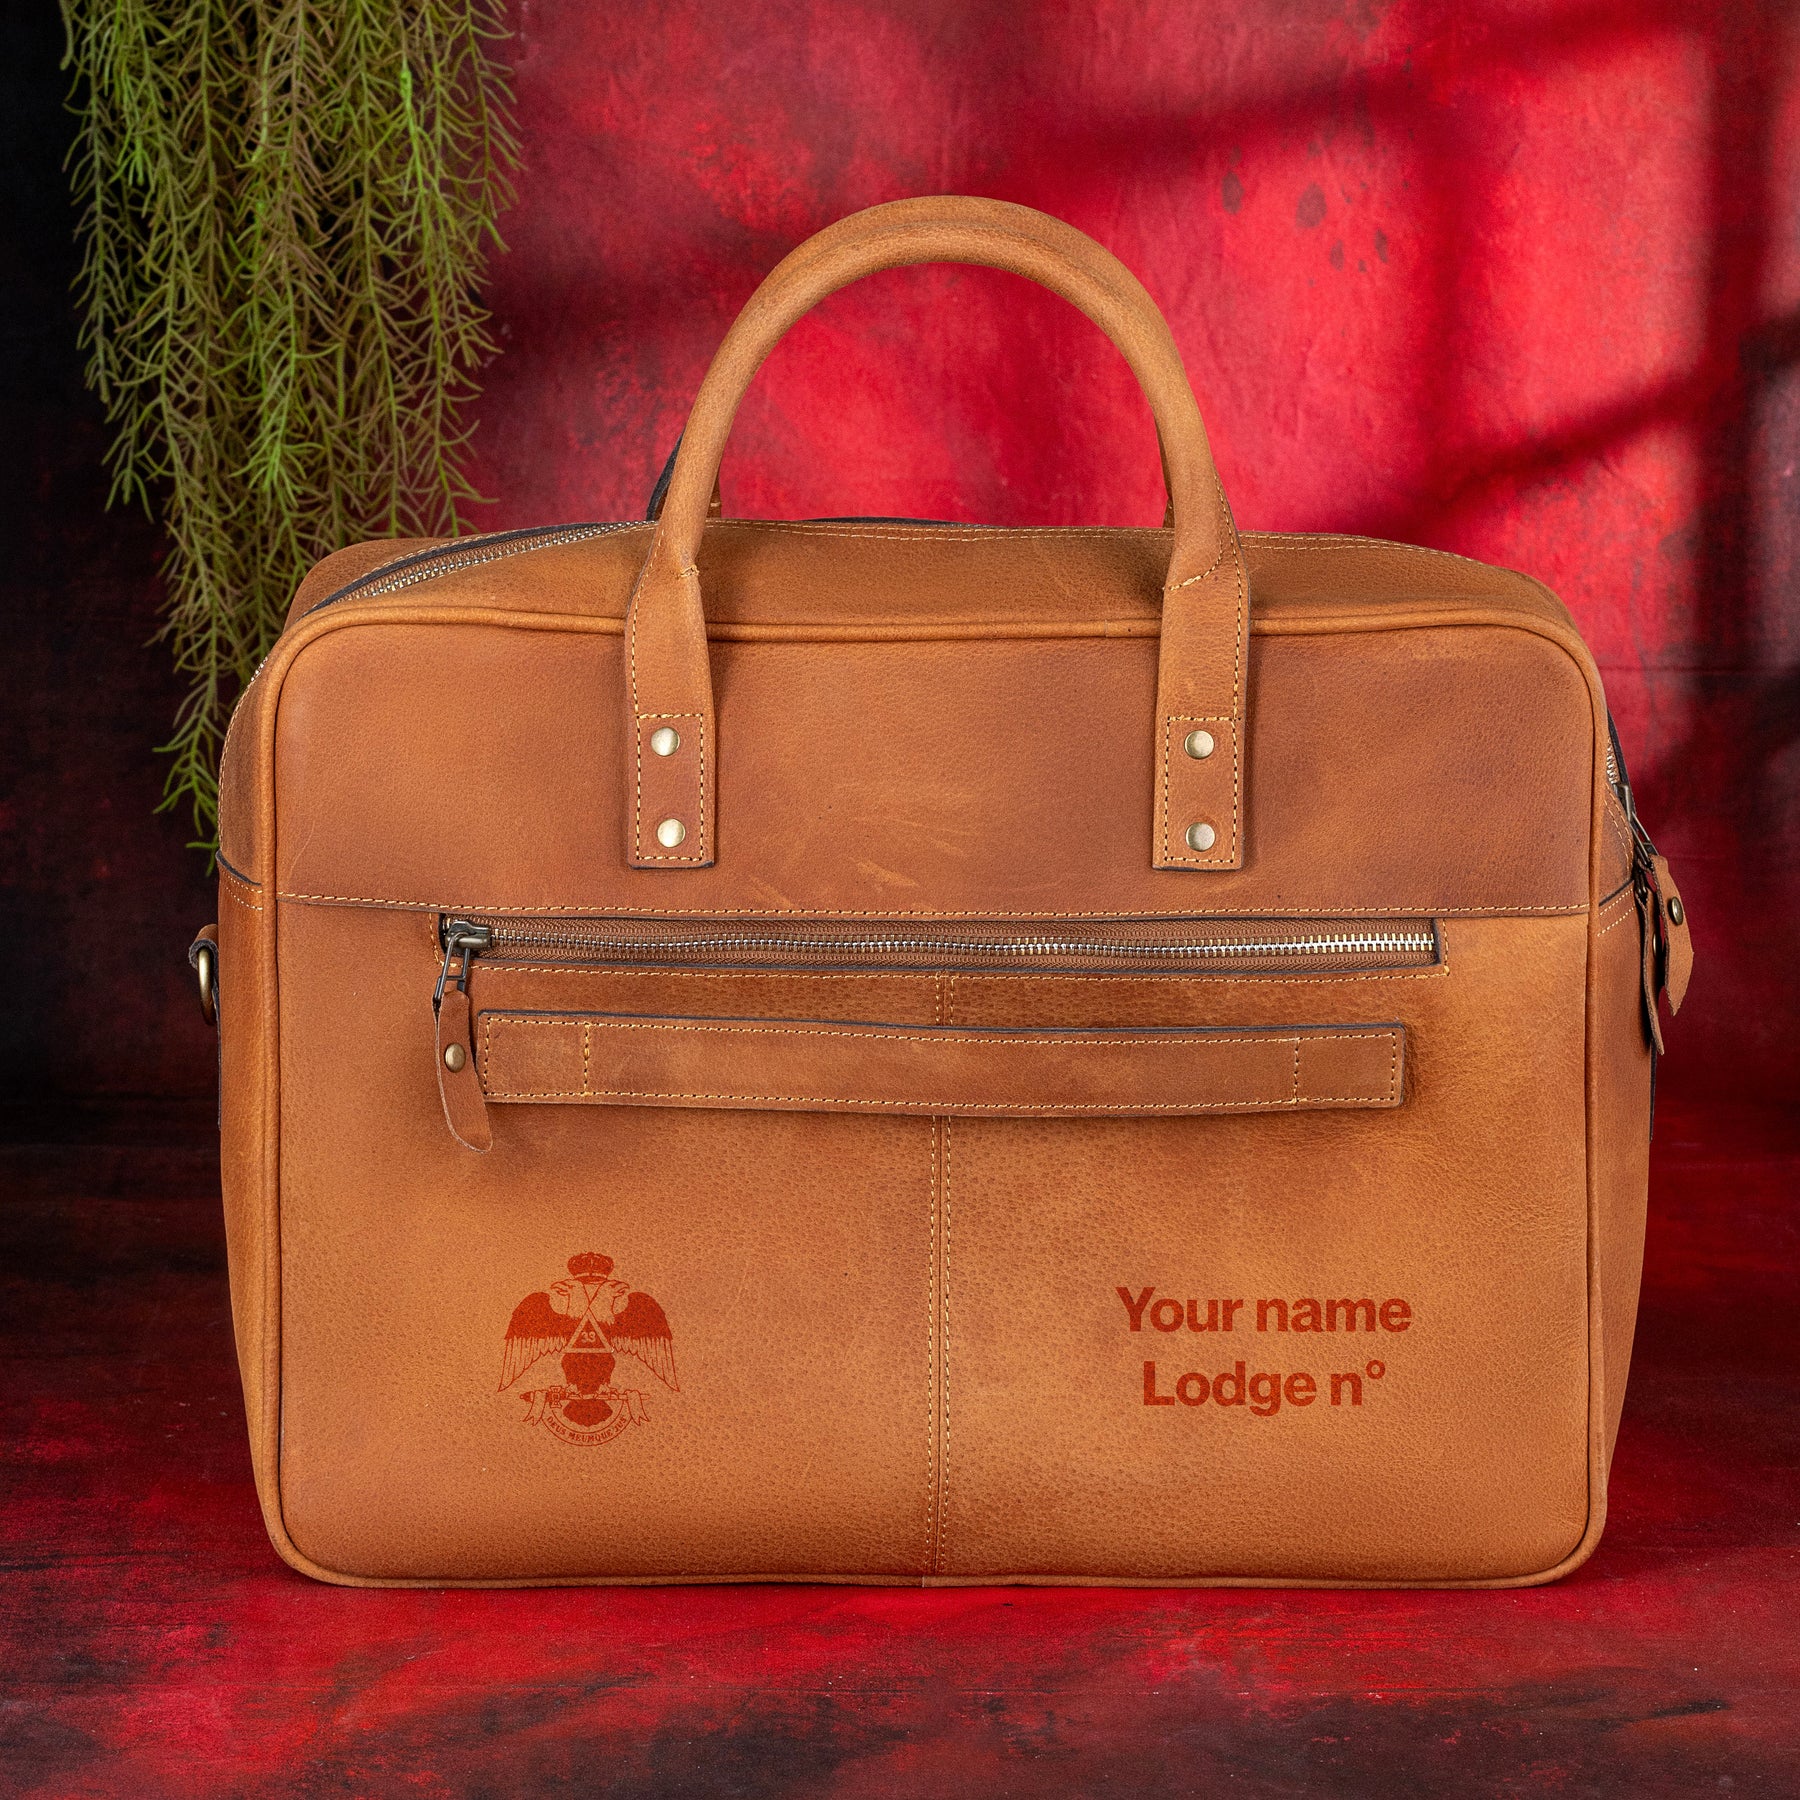 33rd Degree Scottish Rite Briefcase - Wings Down Brown Leather - Bricks Masons